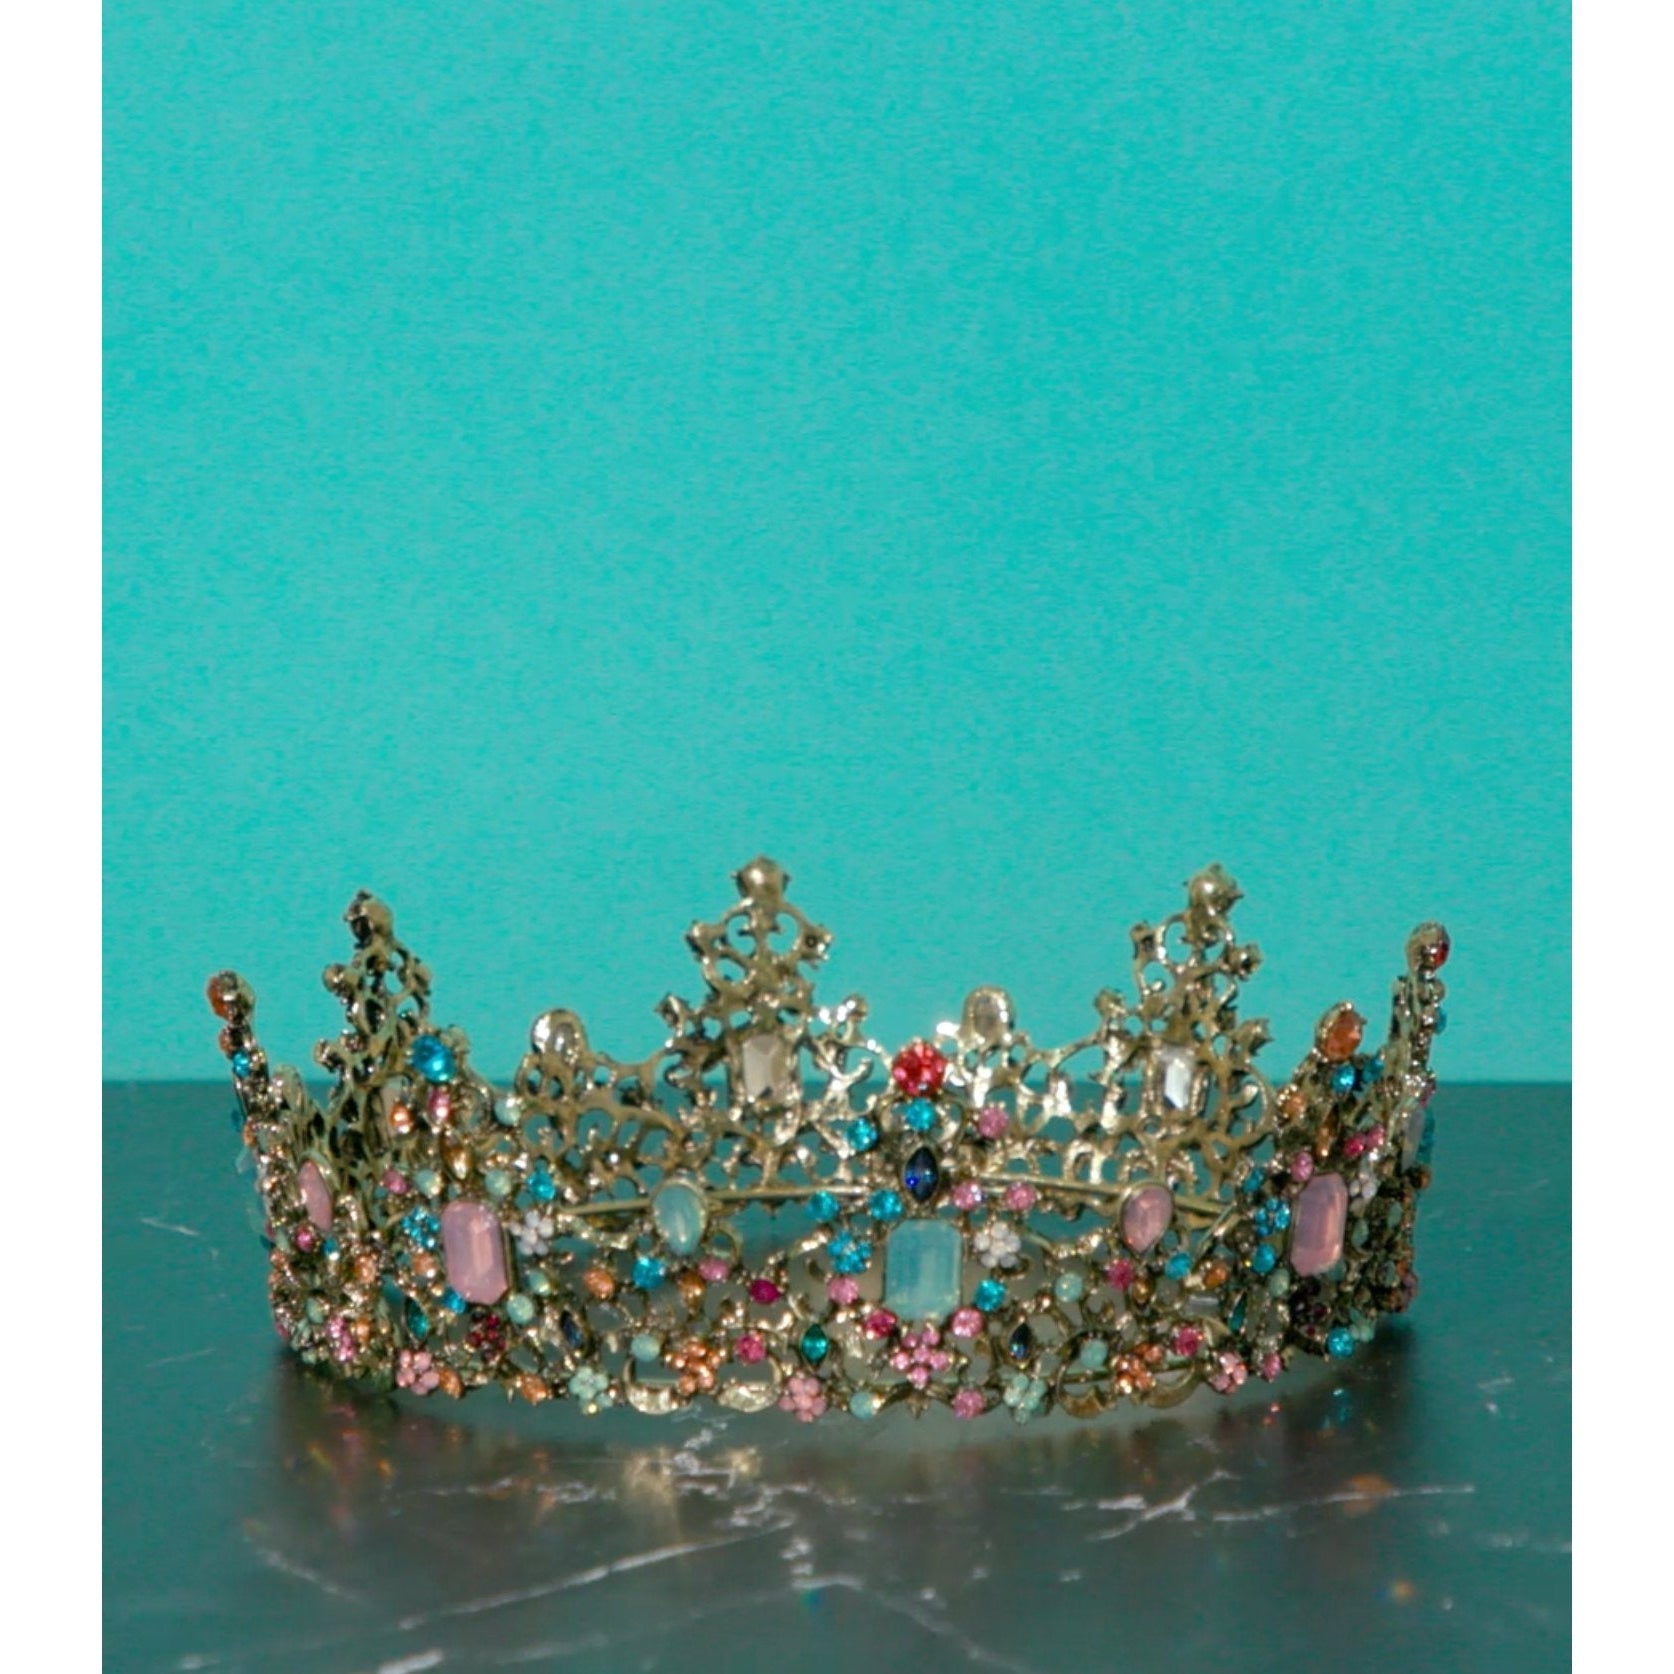 Princess of Pastels Luxe Tiara Crown | Royalty Crown Party or Bridal Hair Accessory